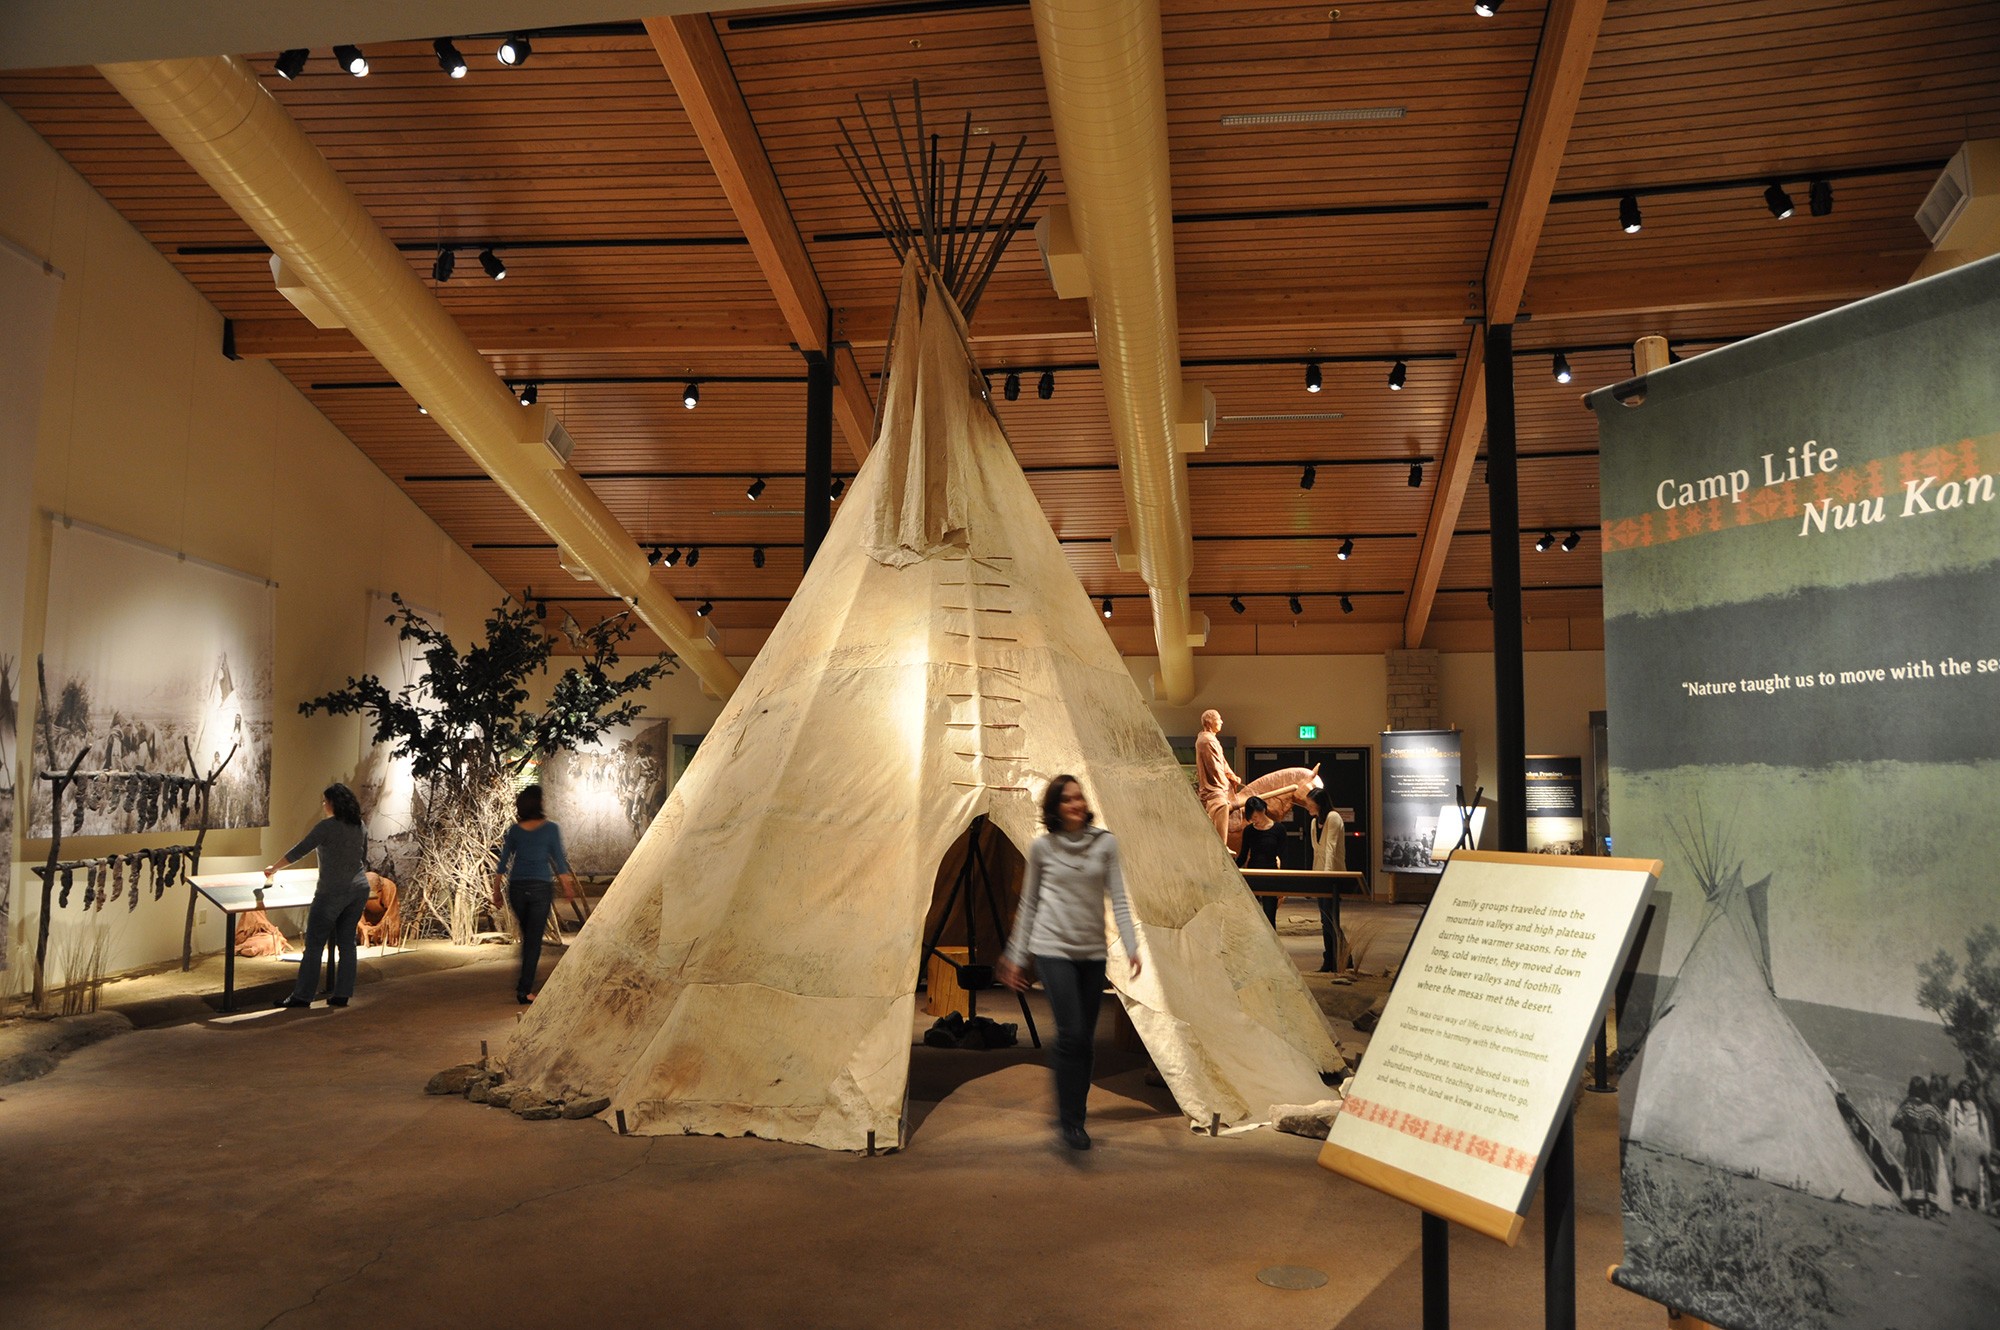 The Southern Ute Cultural Center and Museum